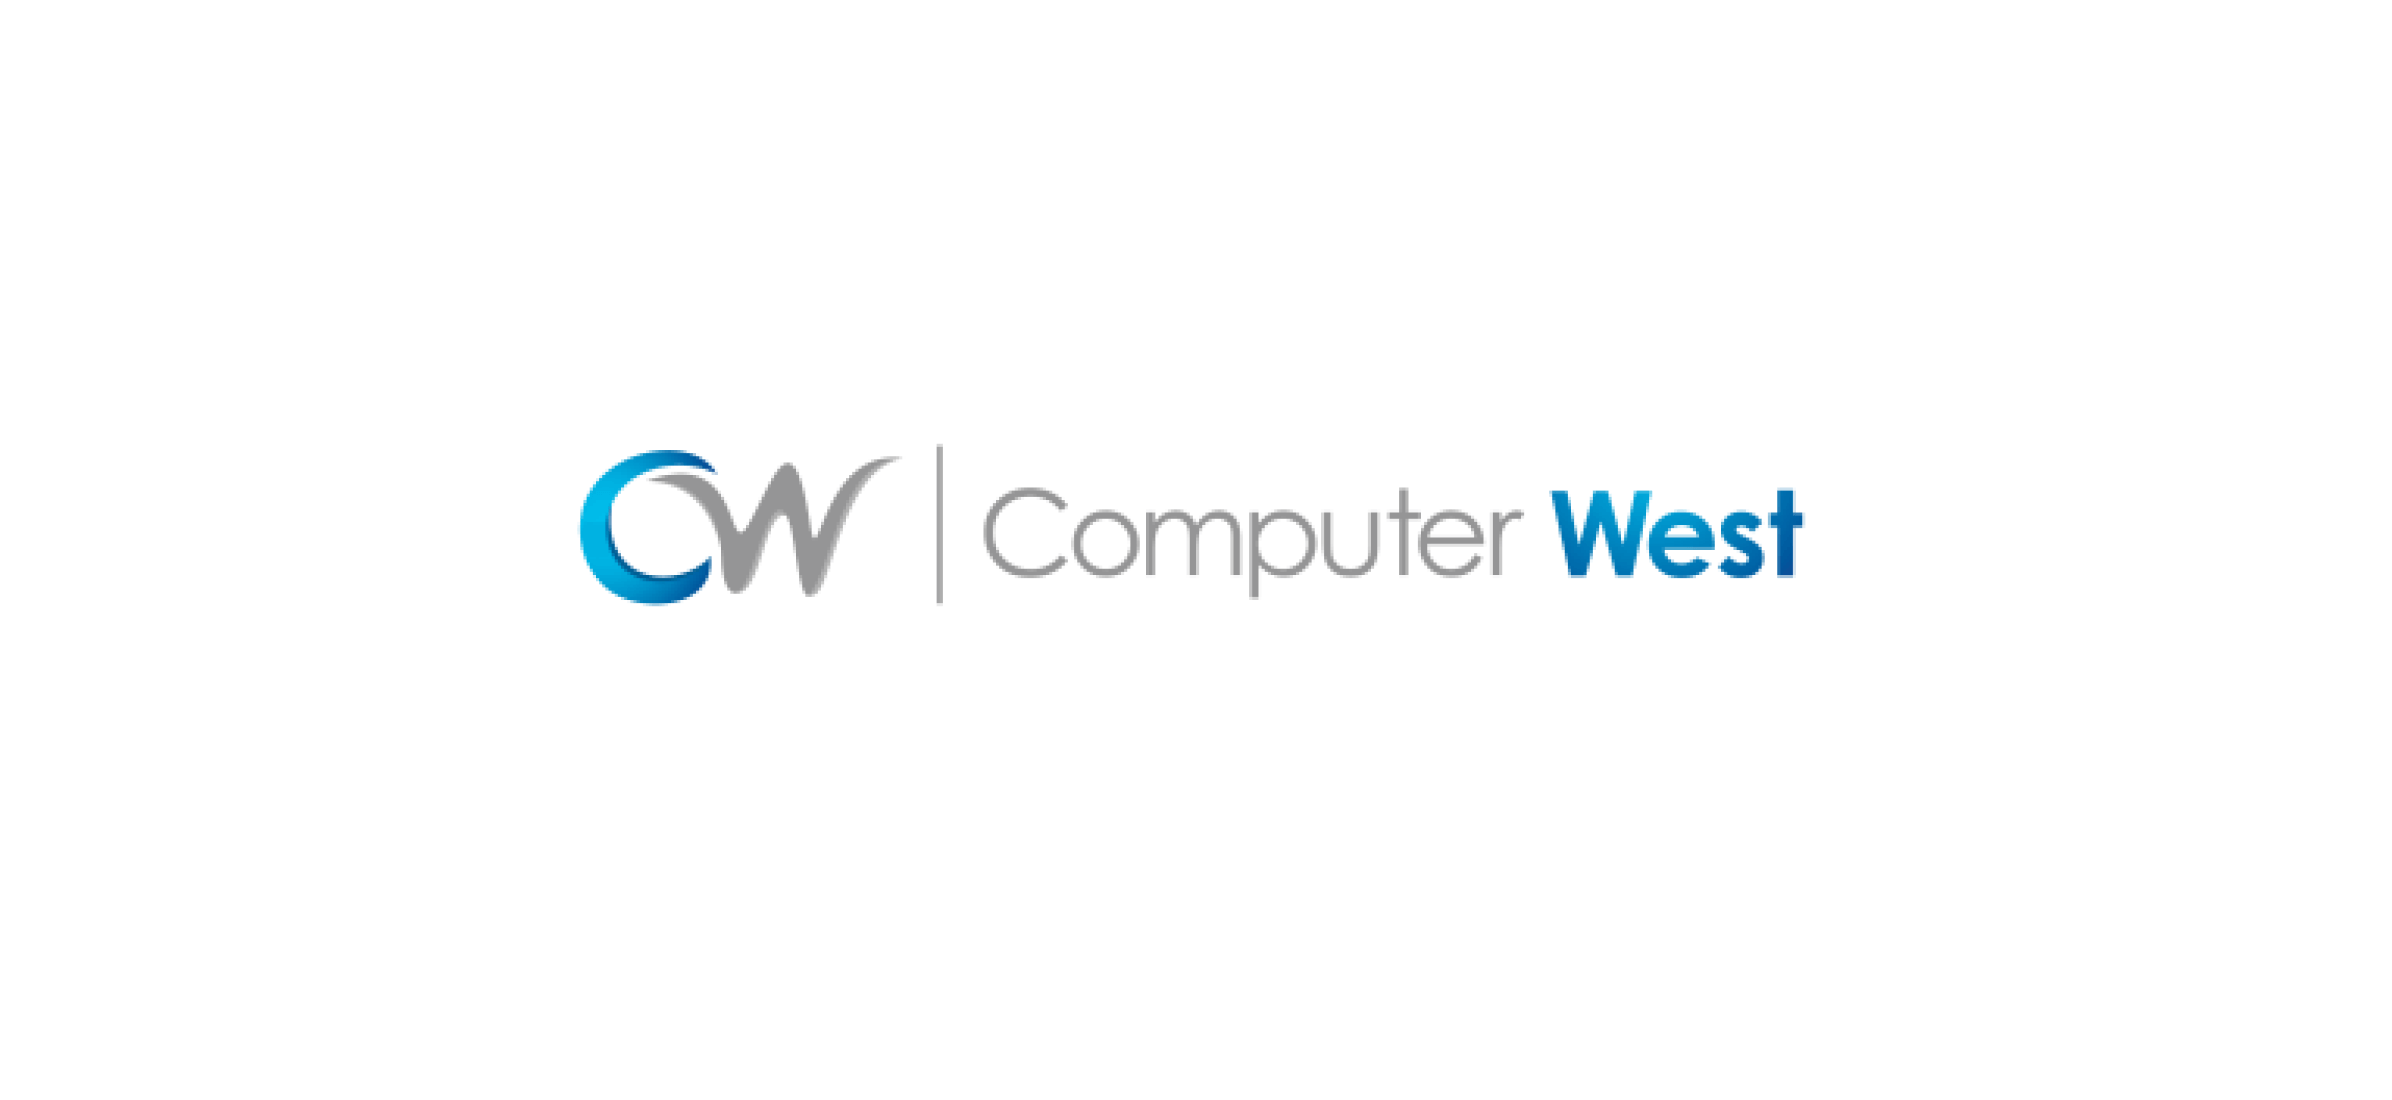 The Computer West logo